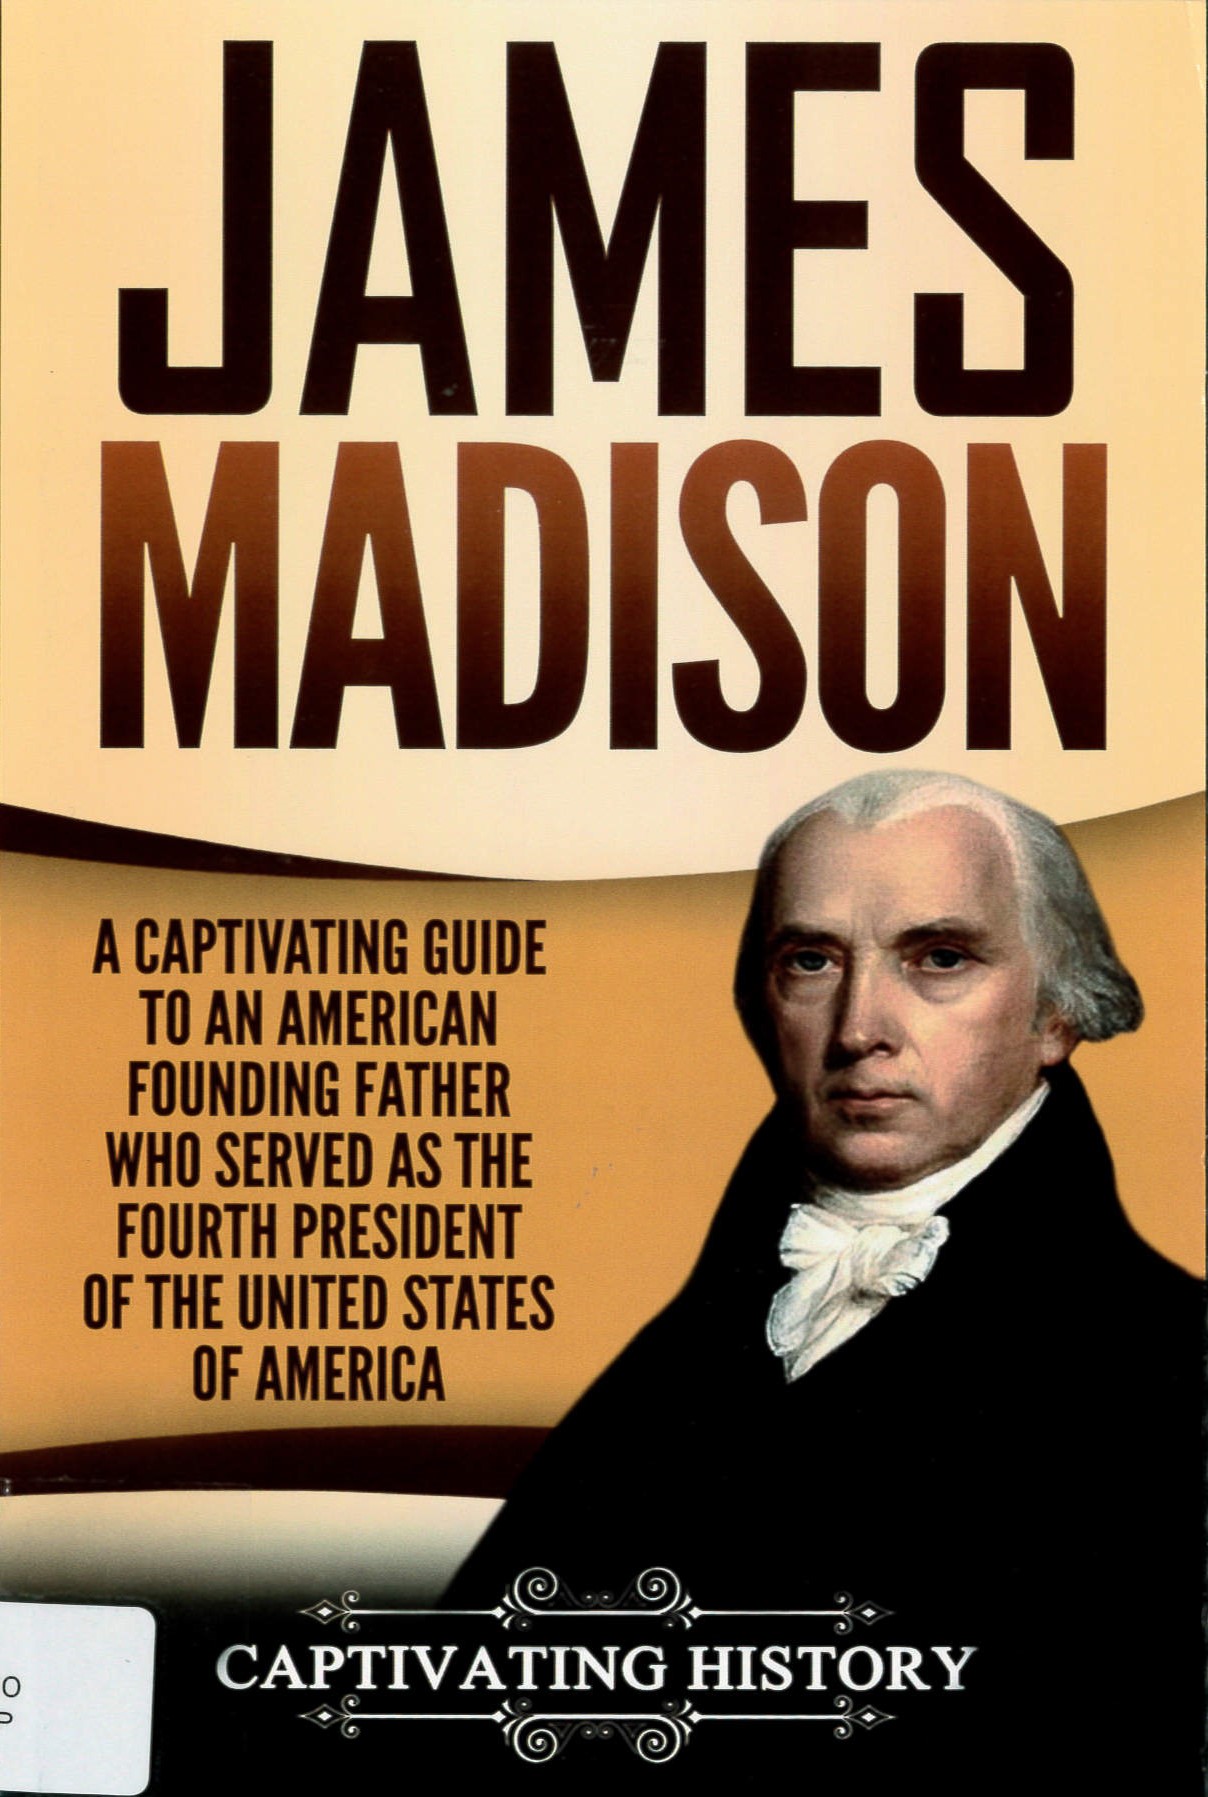 James Madison : A Captivating Guide to an American Founding Father Who Served as the Fourth President of the United States of America.